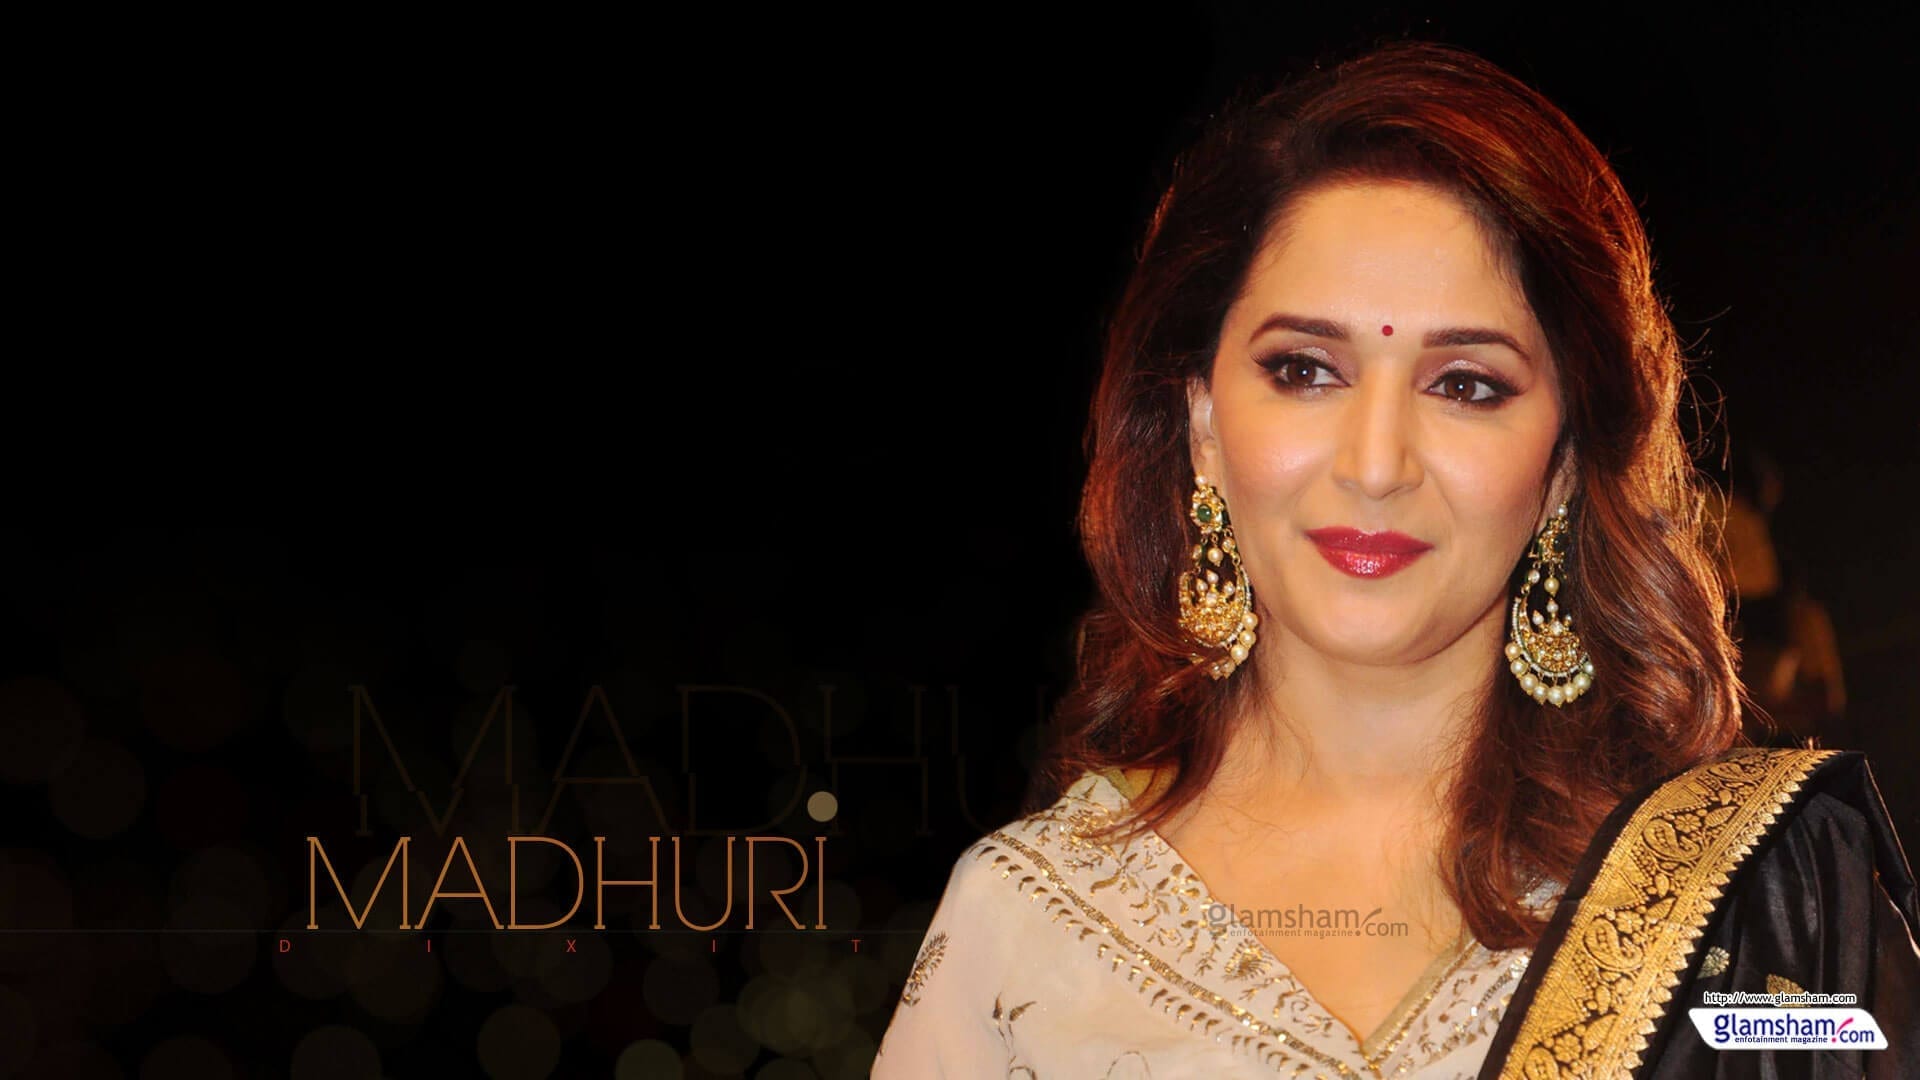 How to Meet Madhuri Dixit Face to Face